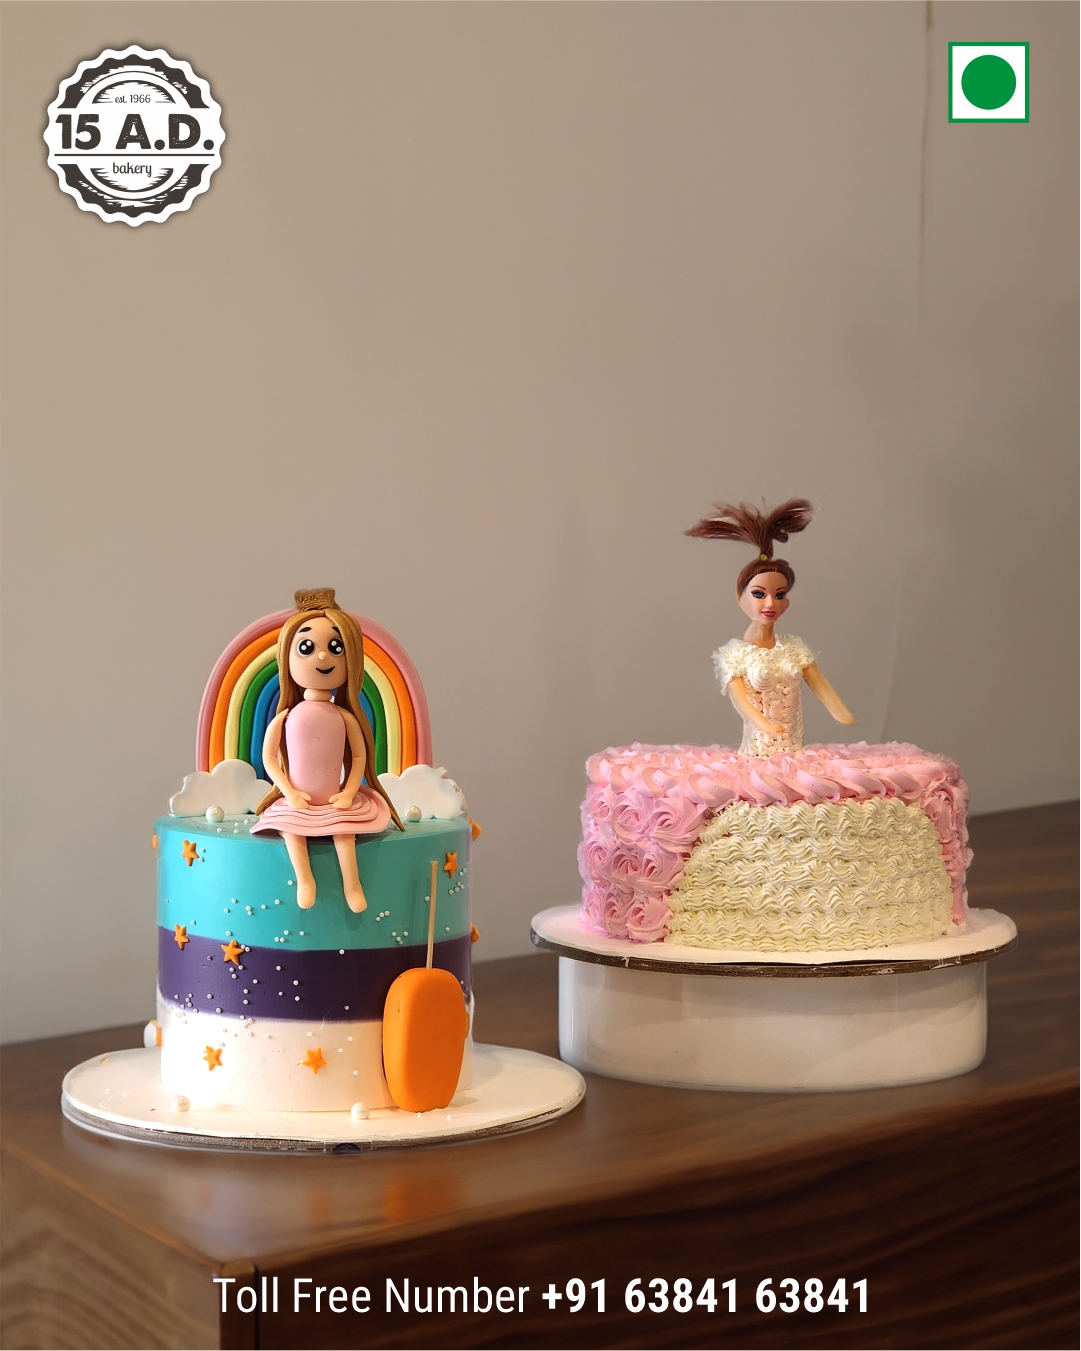 Doll Cake by 15 AD Bakery